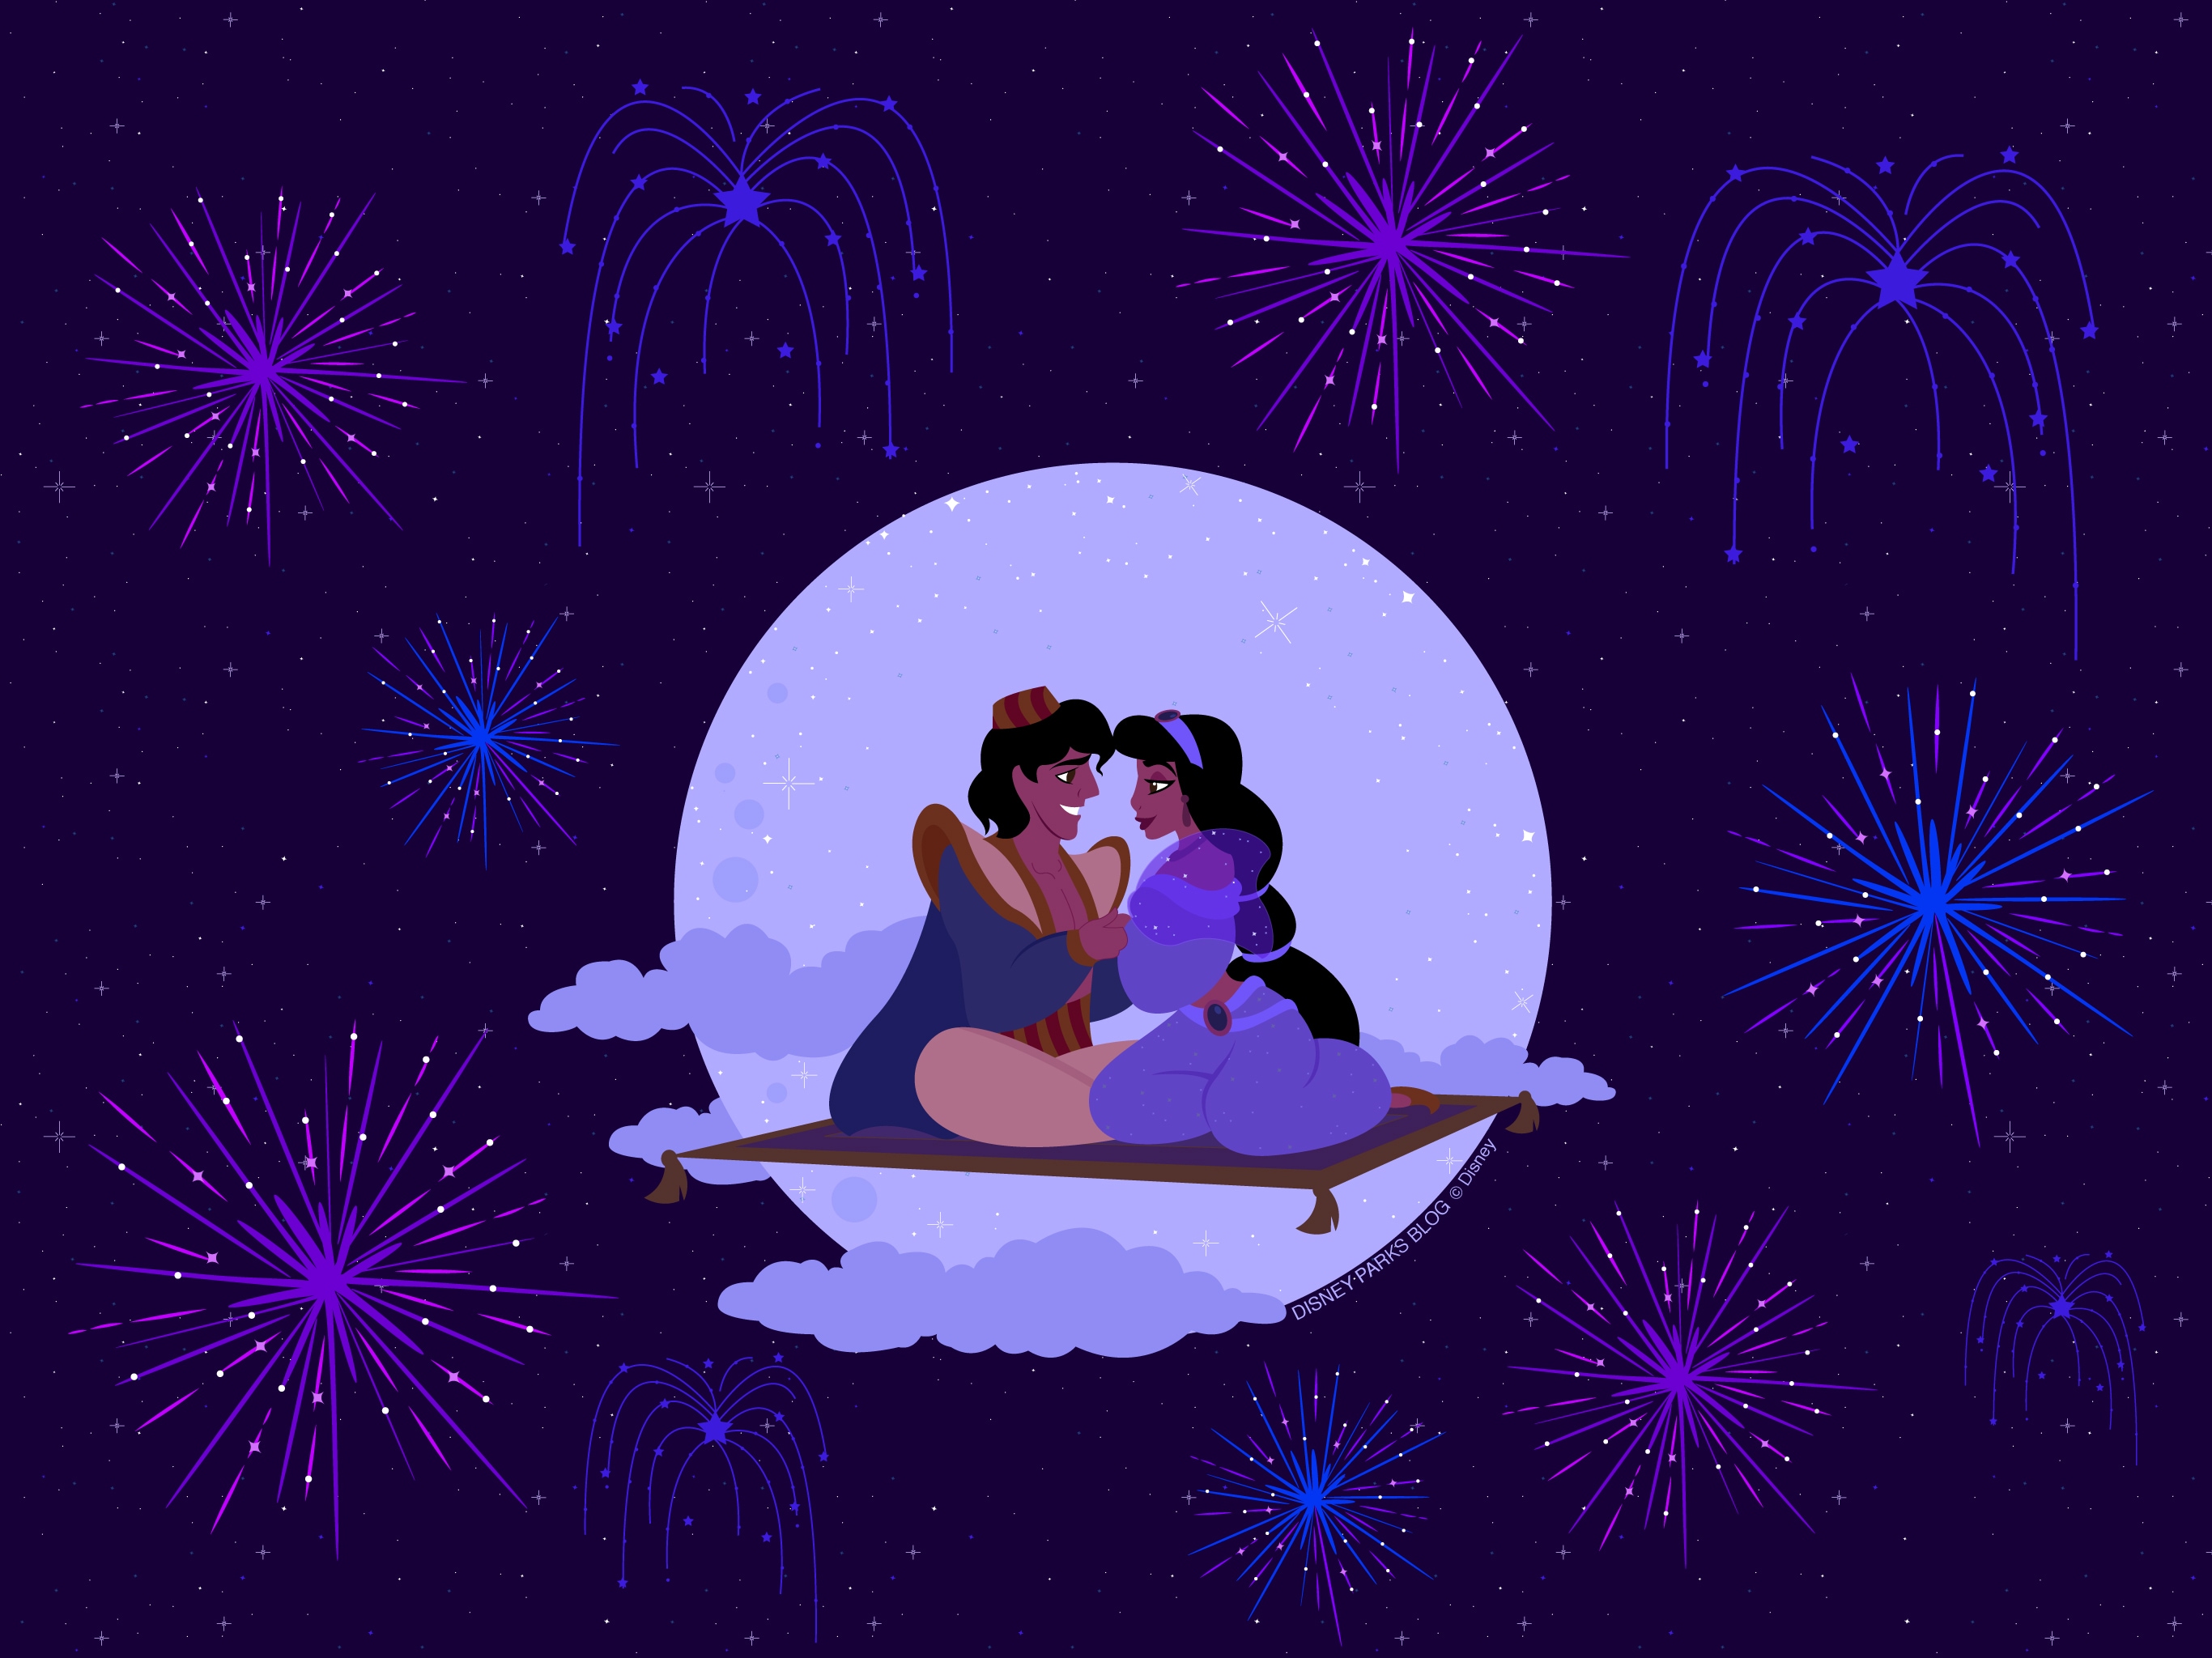 Ring In The New Year With Our Disney Fireworks Inspired Wallpaper Desktop Disney Parks Blog